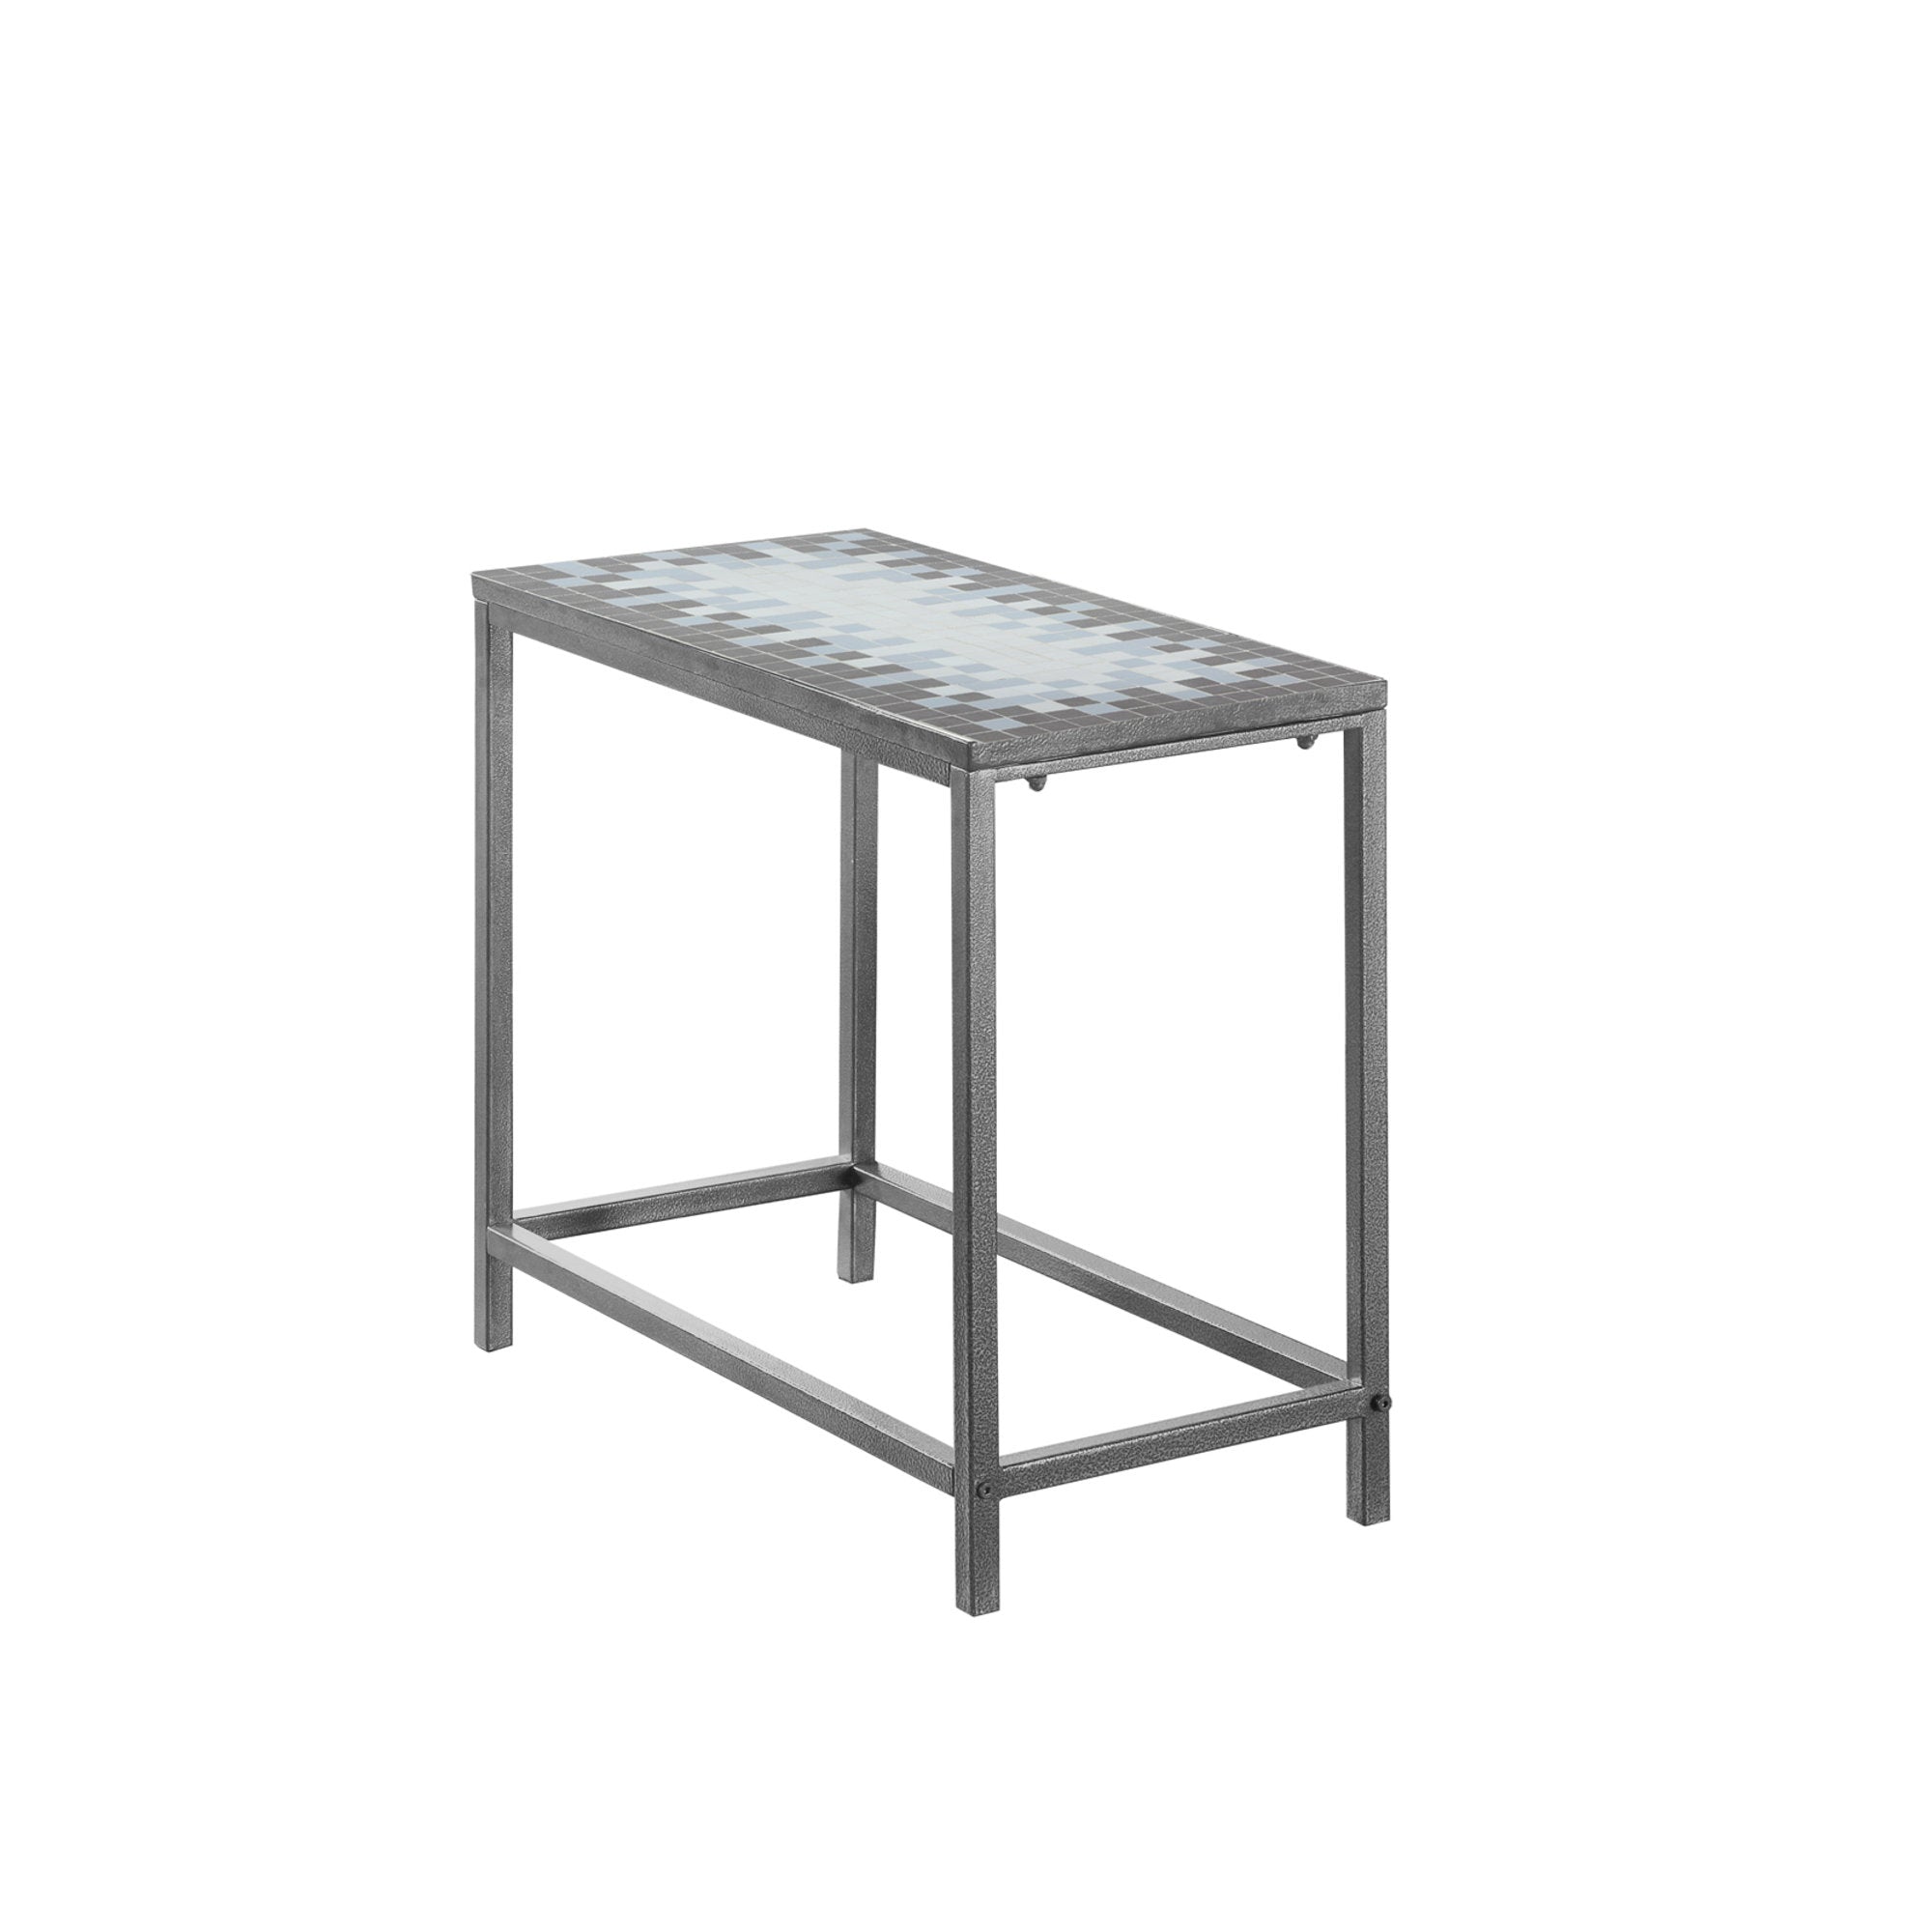 MN-463143    Accent Table, Side, End, Nightstand, Lamp, Living Room, Bedroom, Metal Legs, Tile, Black, Blue, Transitional